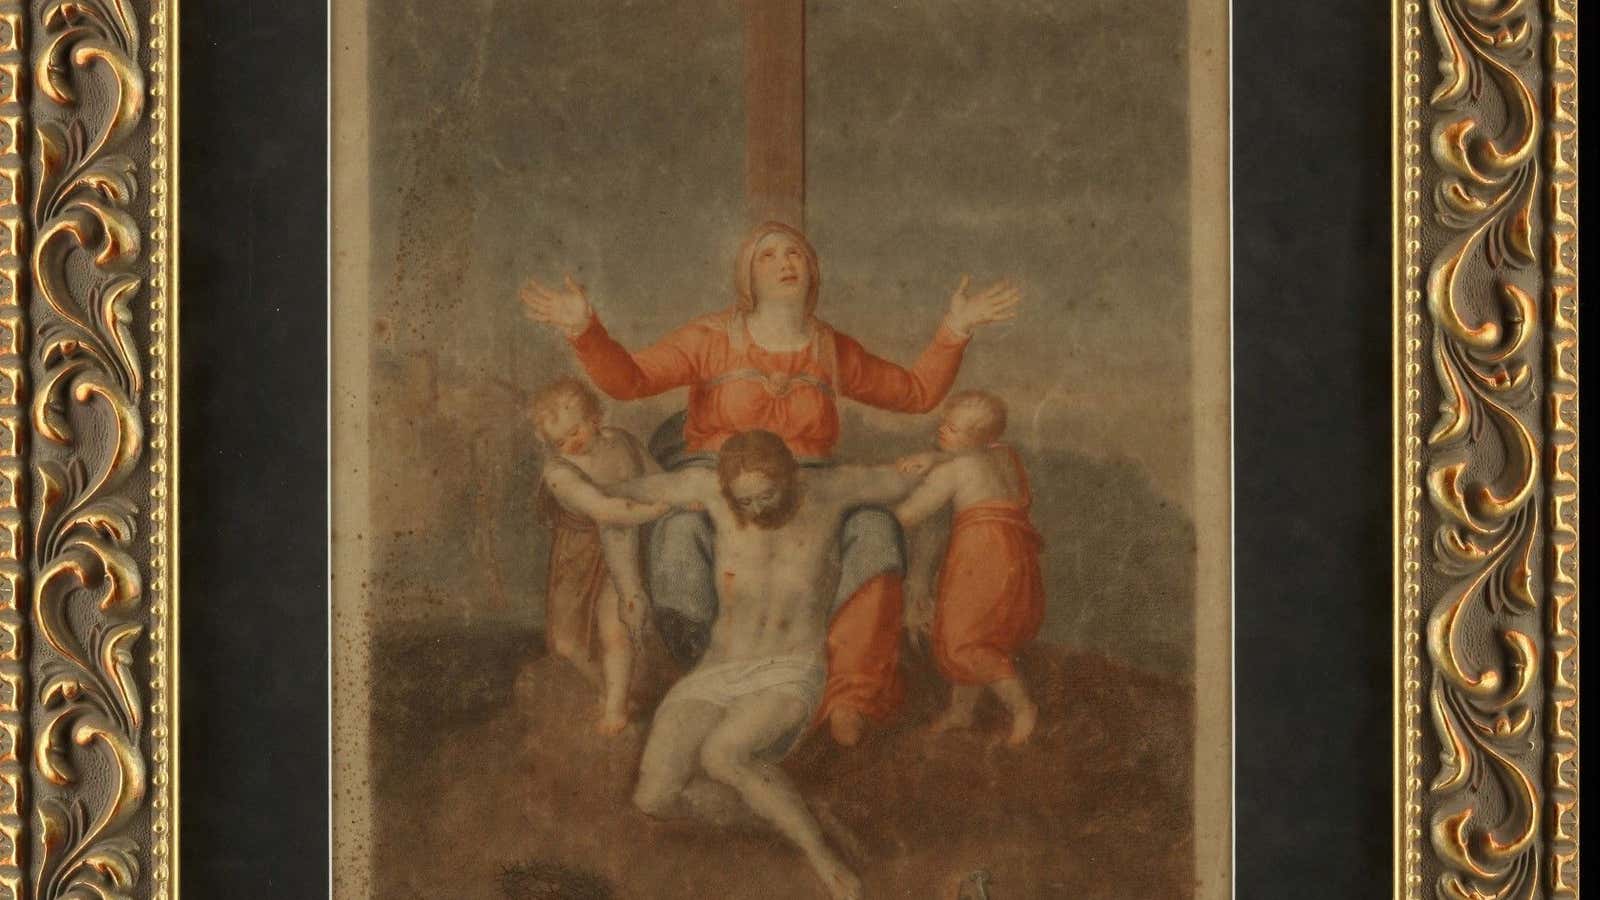 The painting, alleged to be by Michelangelo, shows the crucifixion of Jesus Christ.